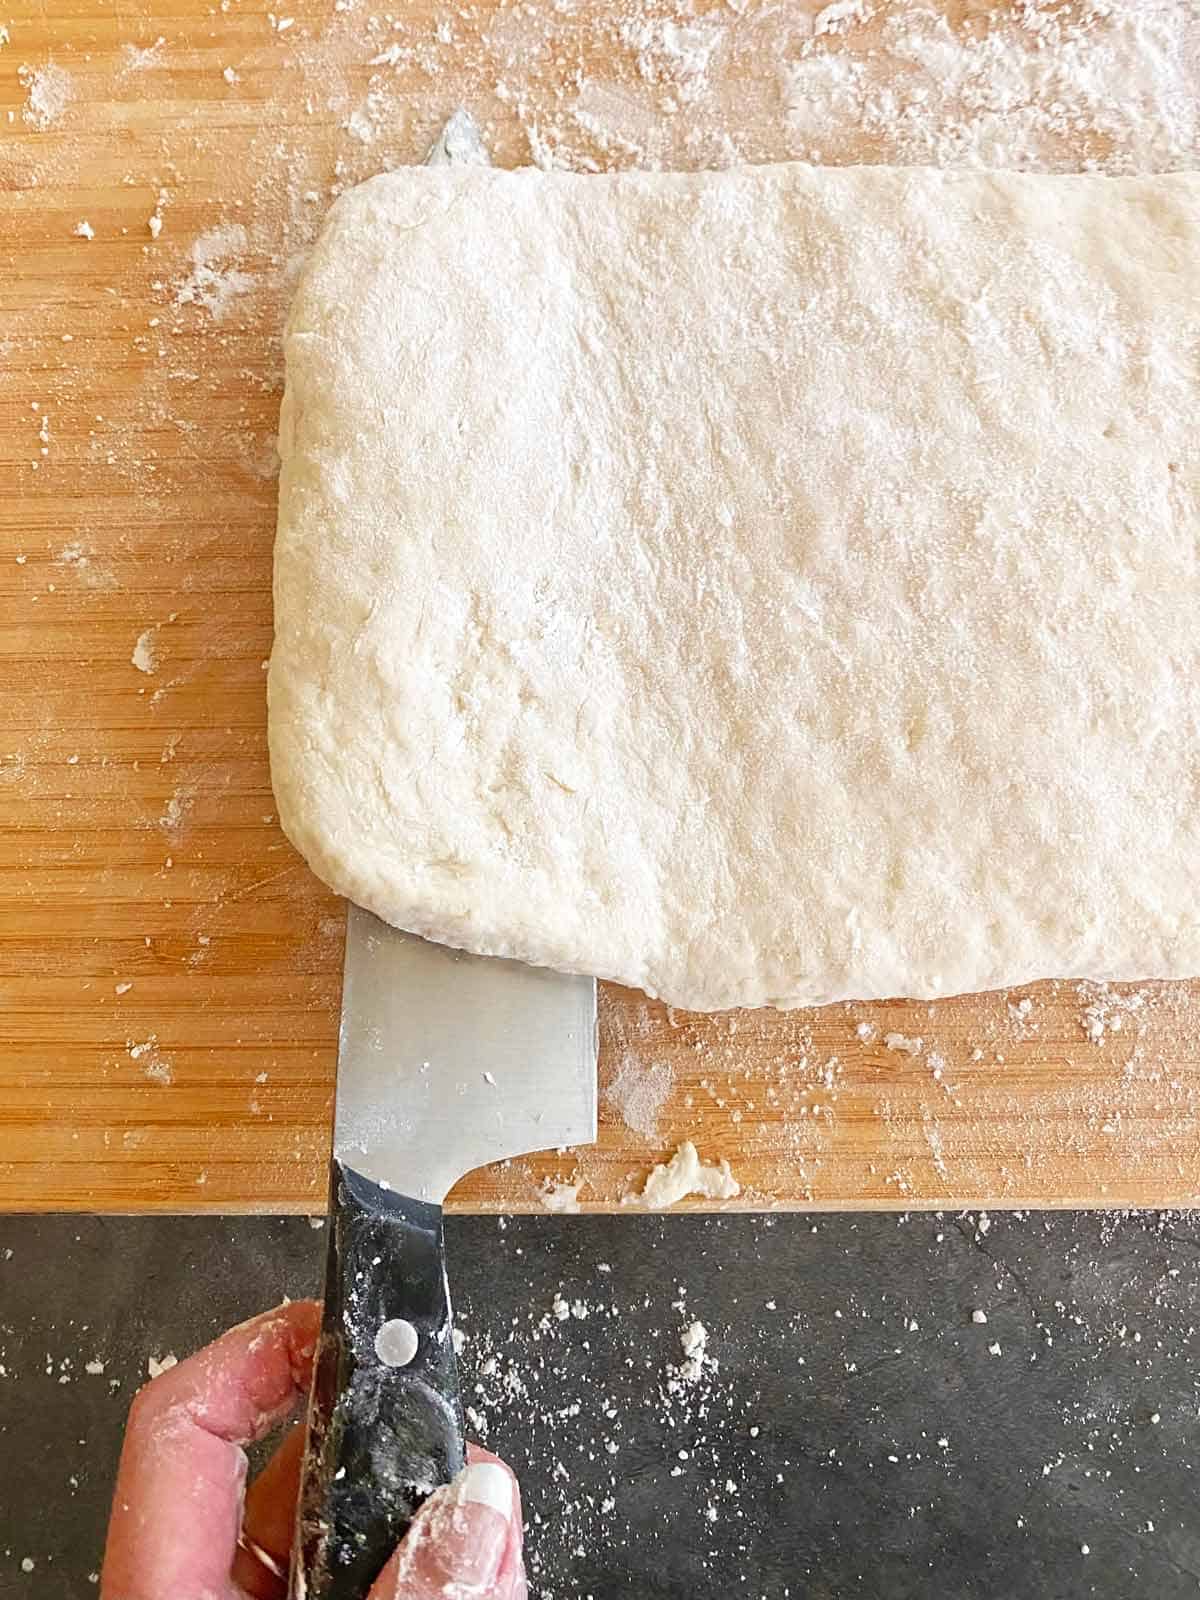 Using a knife to lift the dough and fold it.